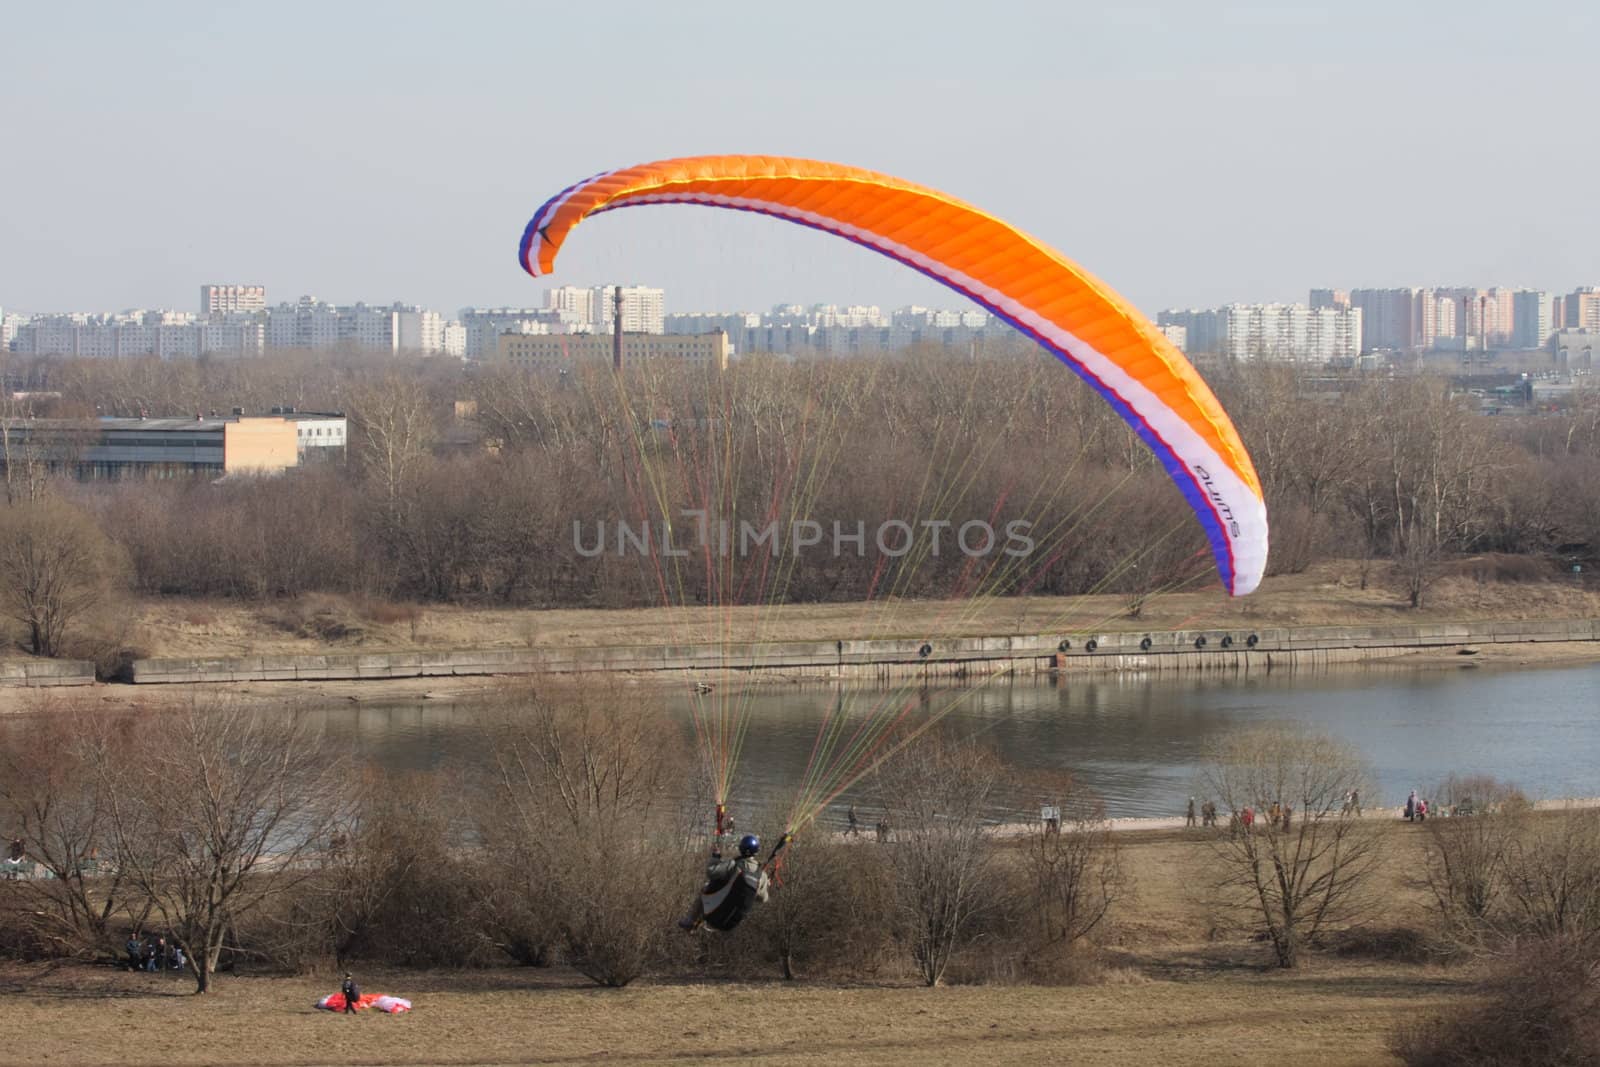 Parachute, the sky, air, slings, red, rest, a hobby, spring, a city, travel, the earth, houses, a landscape, sports